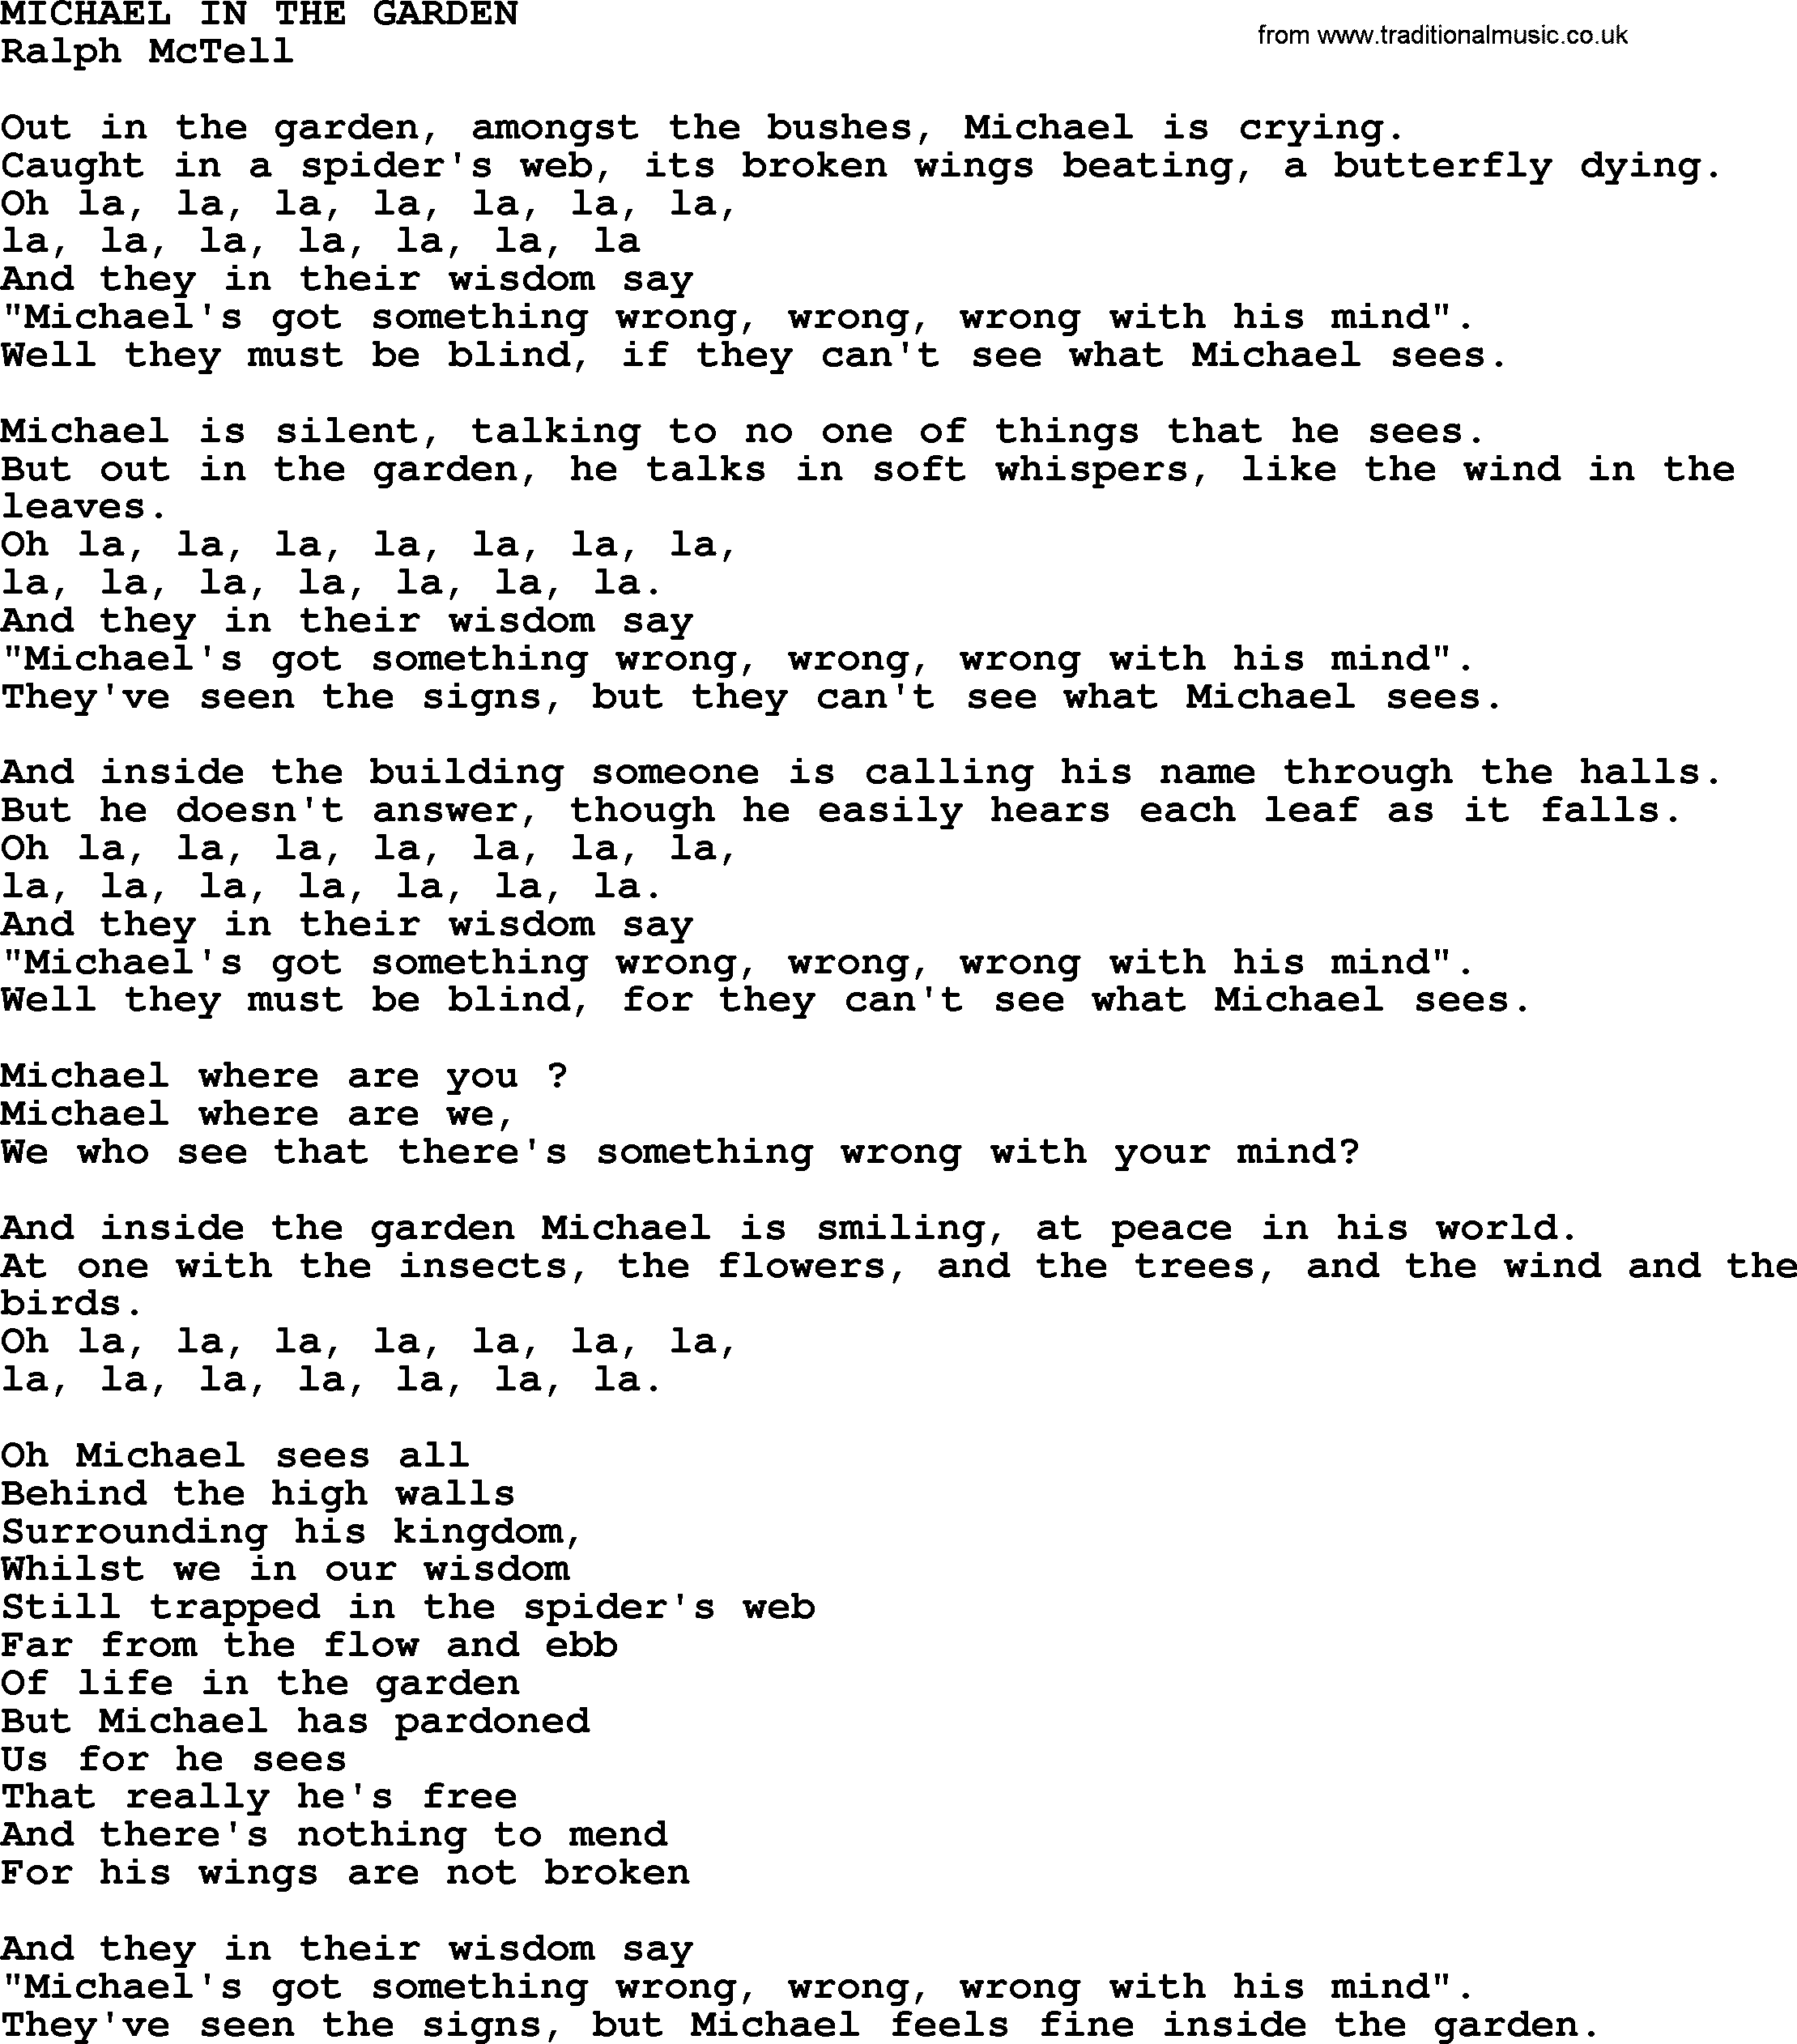 Michael In The Garden Txt By Ralph Mctell Lyrics And Chords